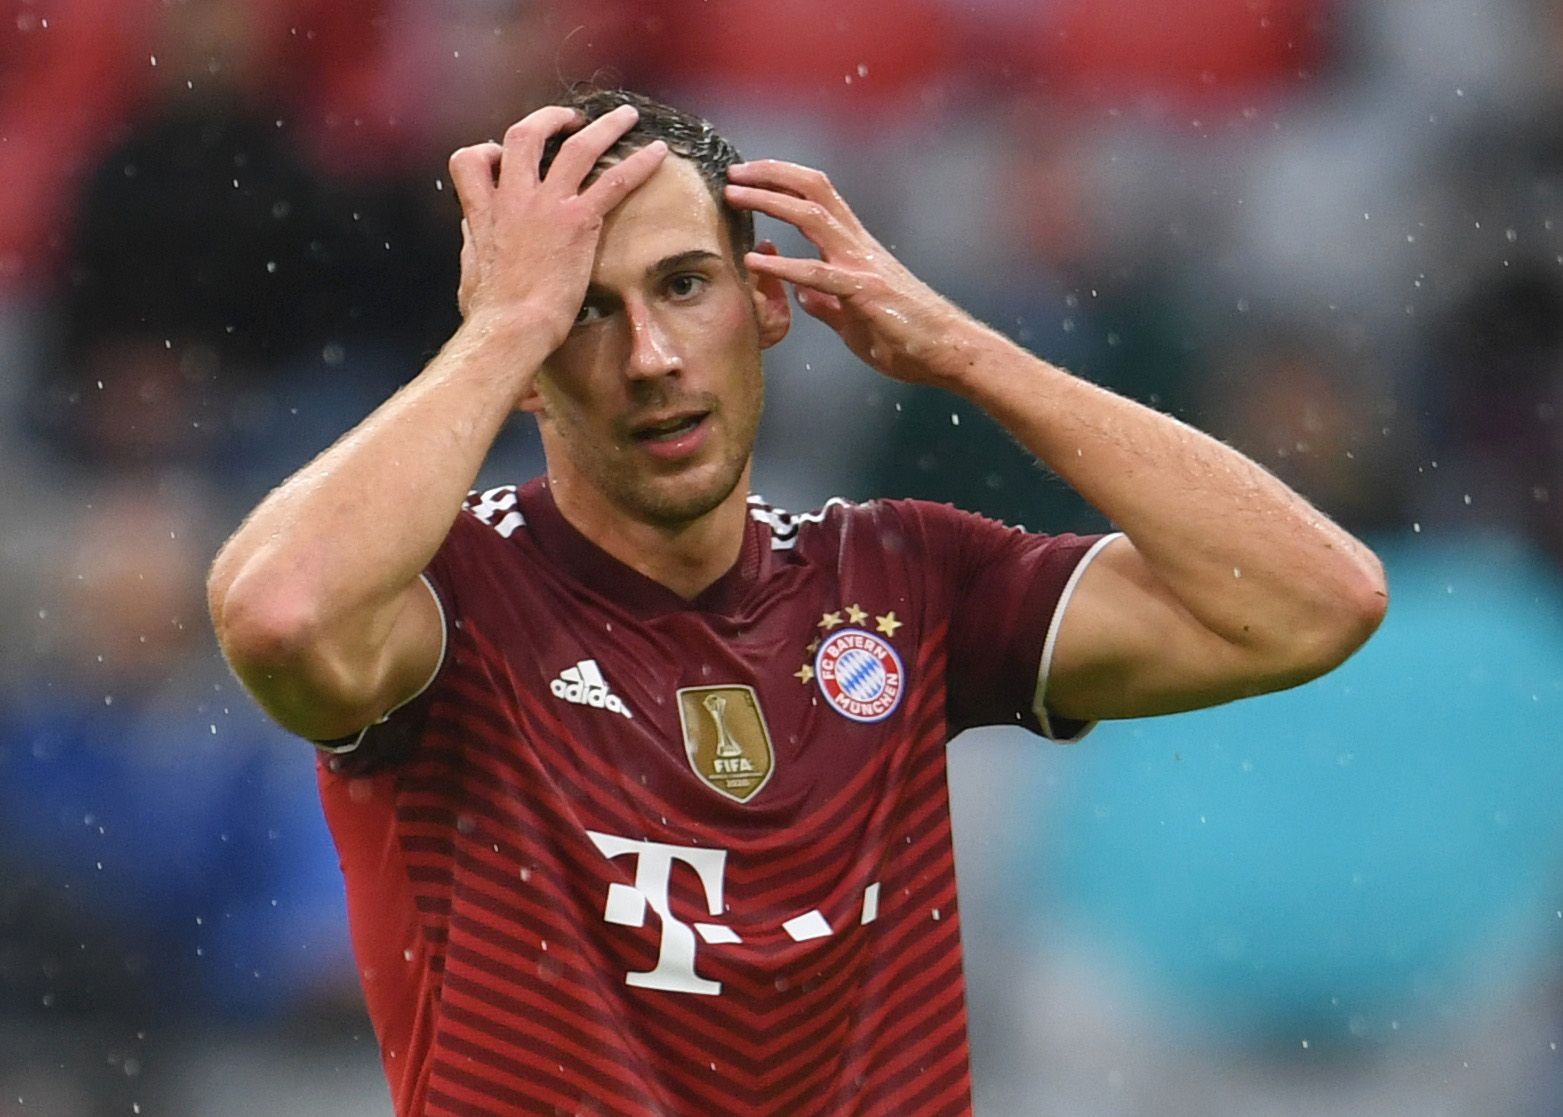 Soccer Football - Bundesliga - Bayern Munich v Hertha BSC - Allianz Arena, Munich, Germany - August 28, 2021 Bayern Munich's Leon Goretzka reacts REUTERS/Andreas Gebert DFL regulations prohibit any use of photographs as image sequences and/or quasi-video.